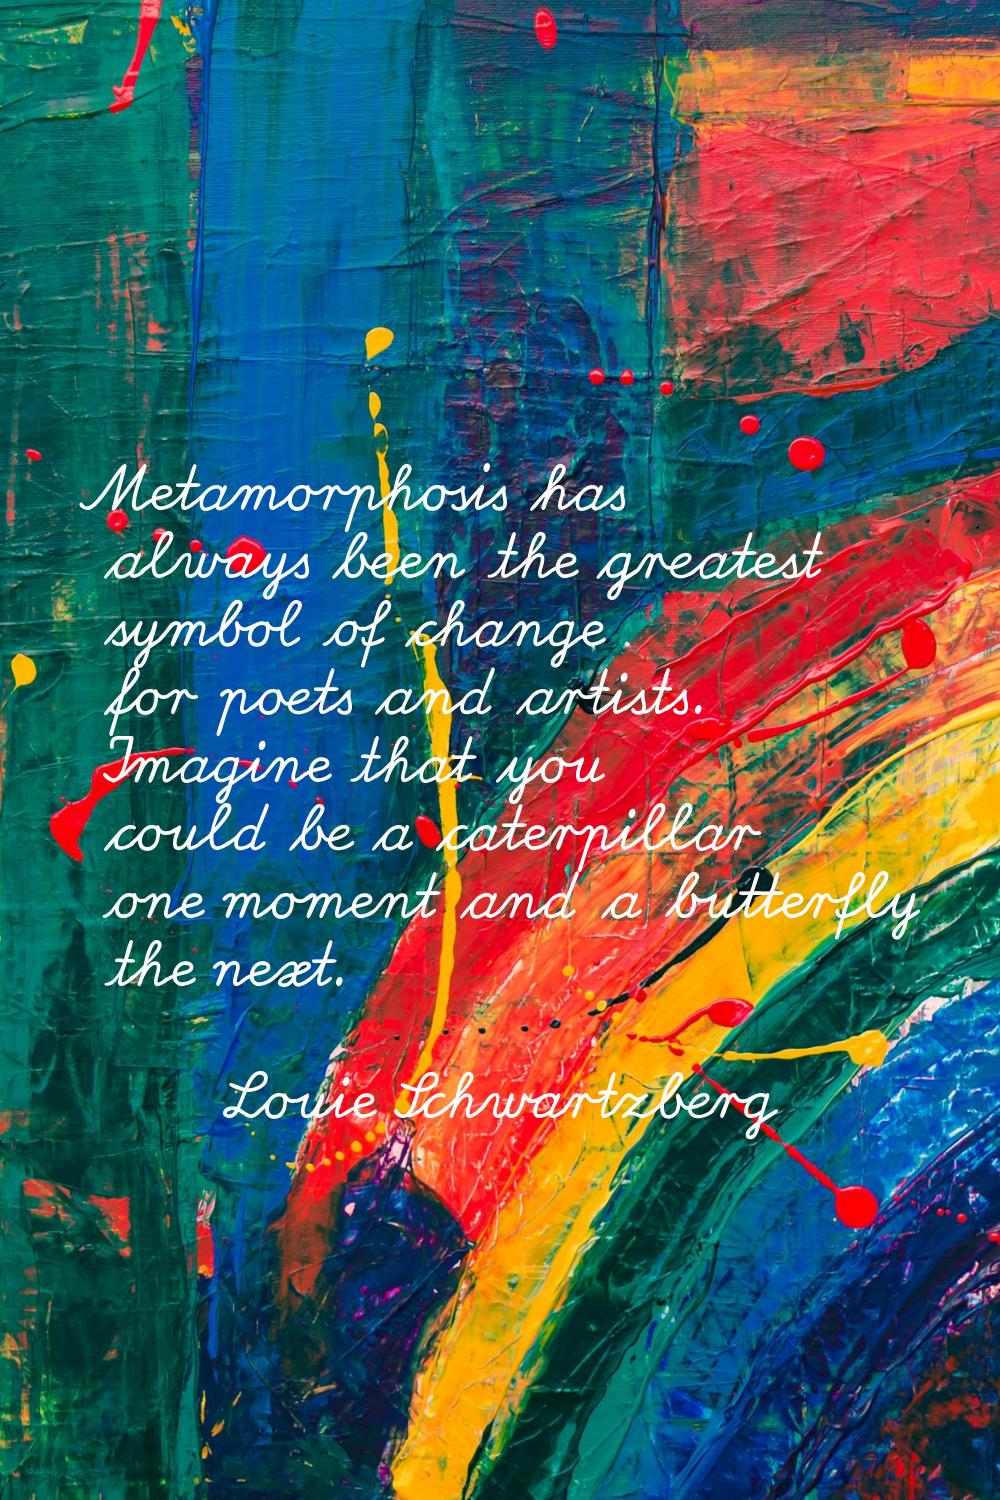 Metamorphosis has always been the greatest symbol of change for poets and artists. Imagine that you